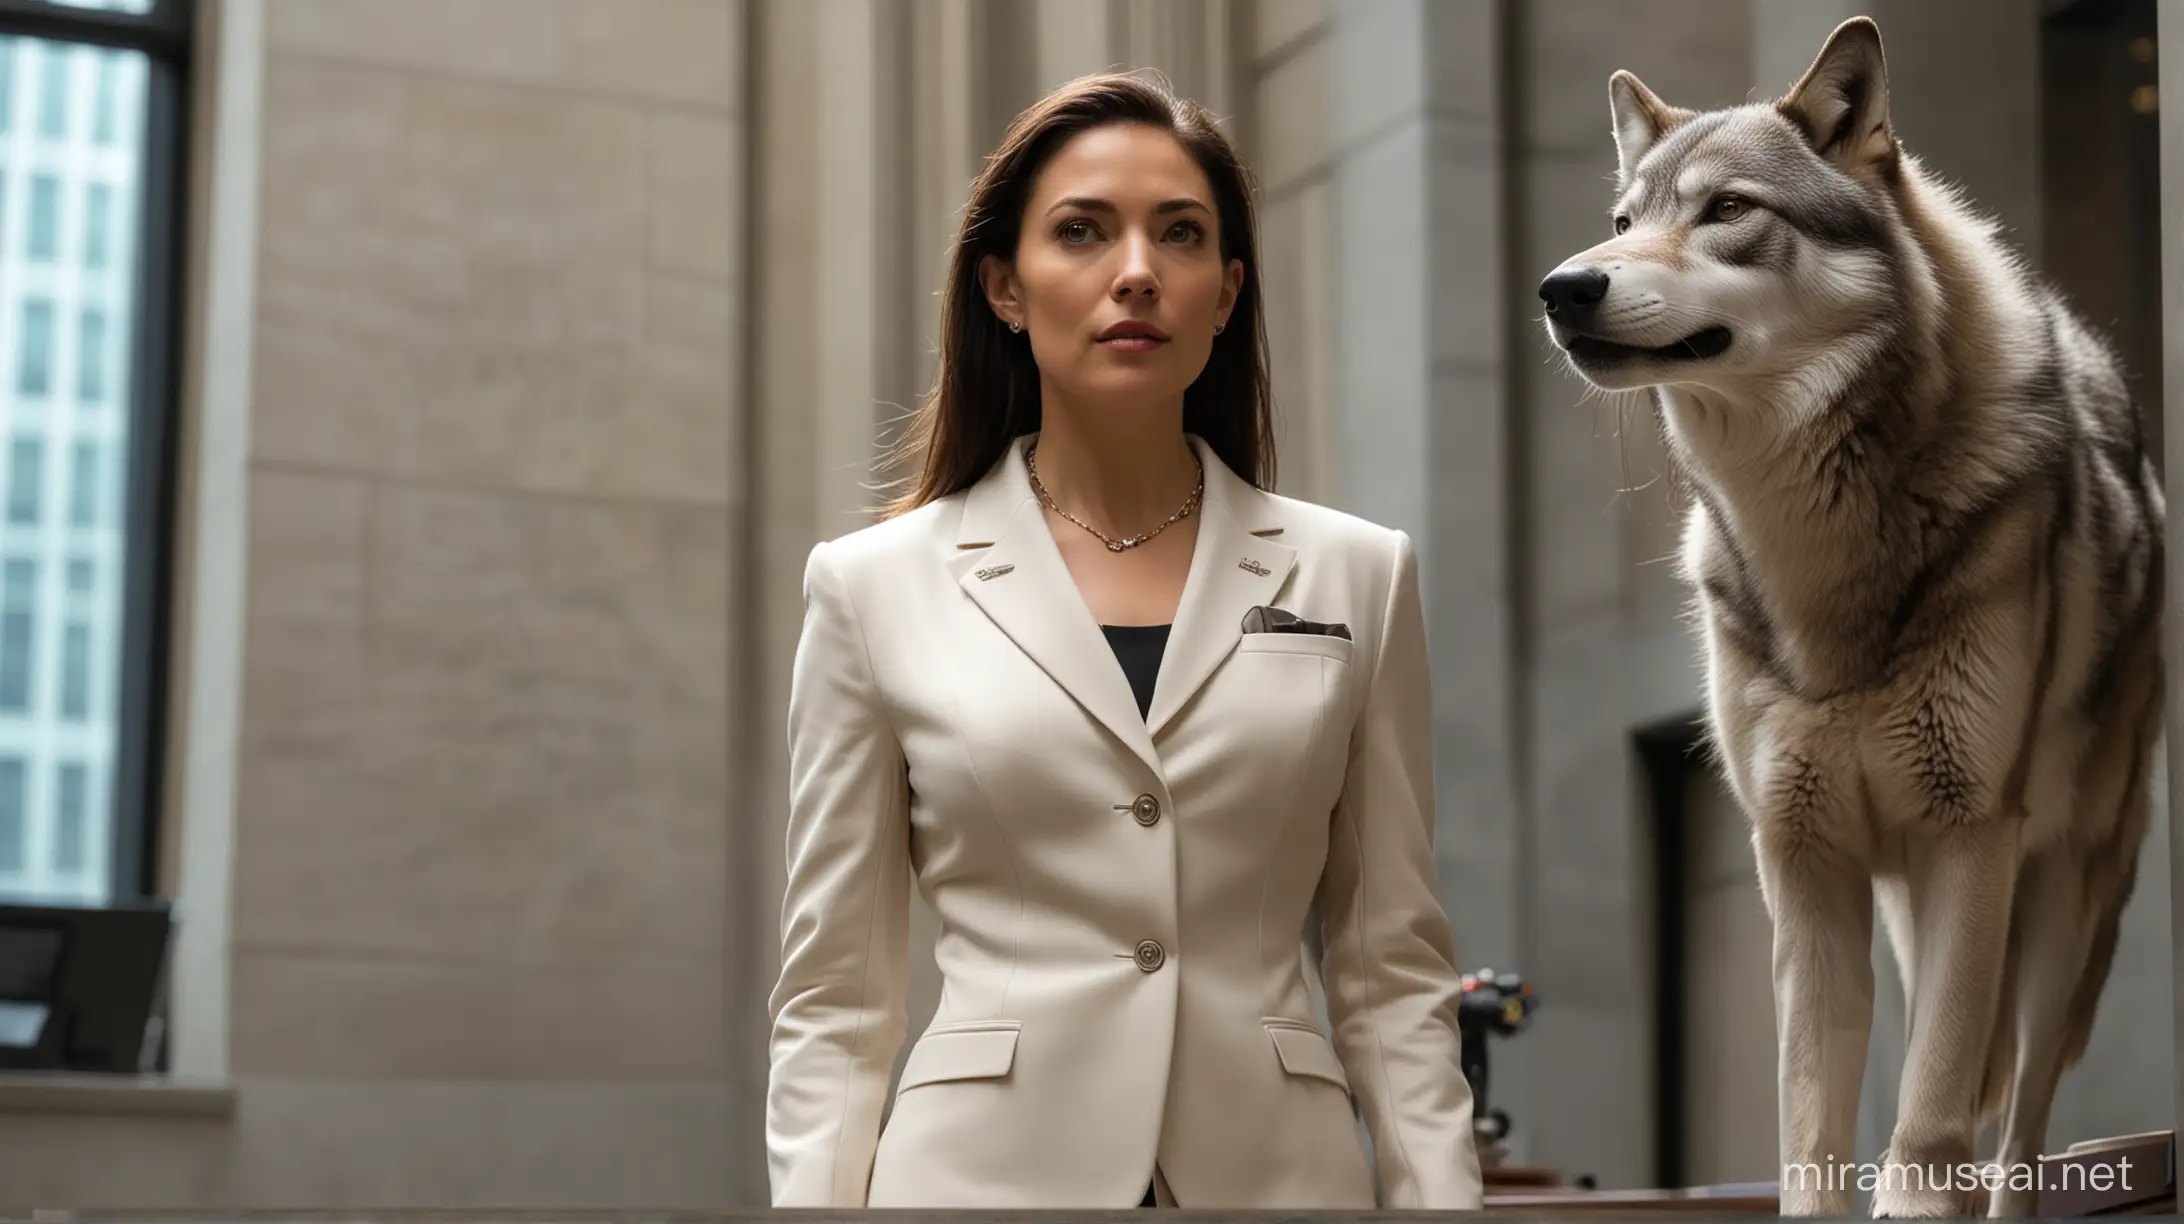 Sigma Queen of American Heritage in Wall Street Boardroom with Cybernetic Wolf Companion